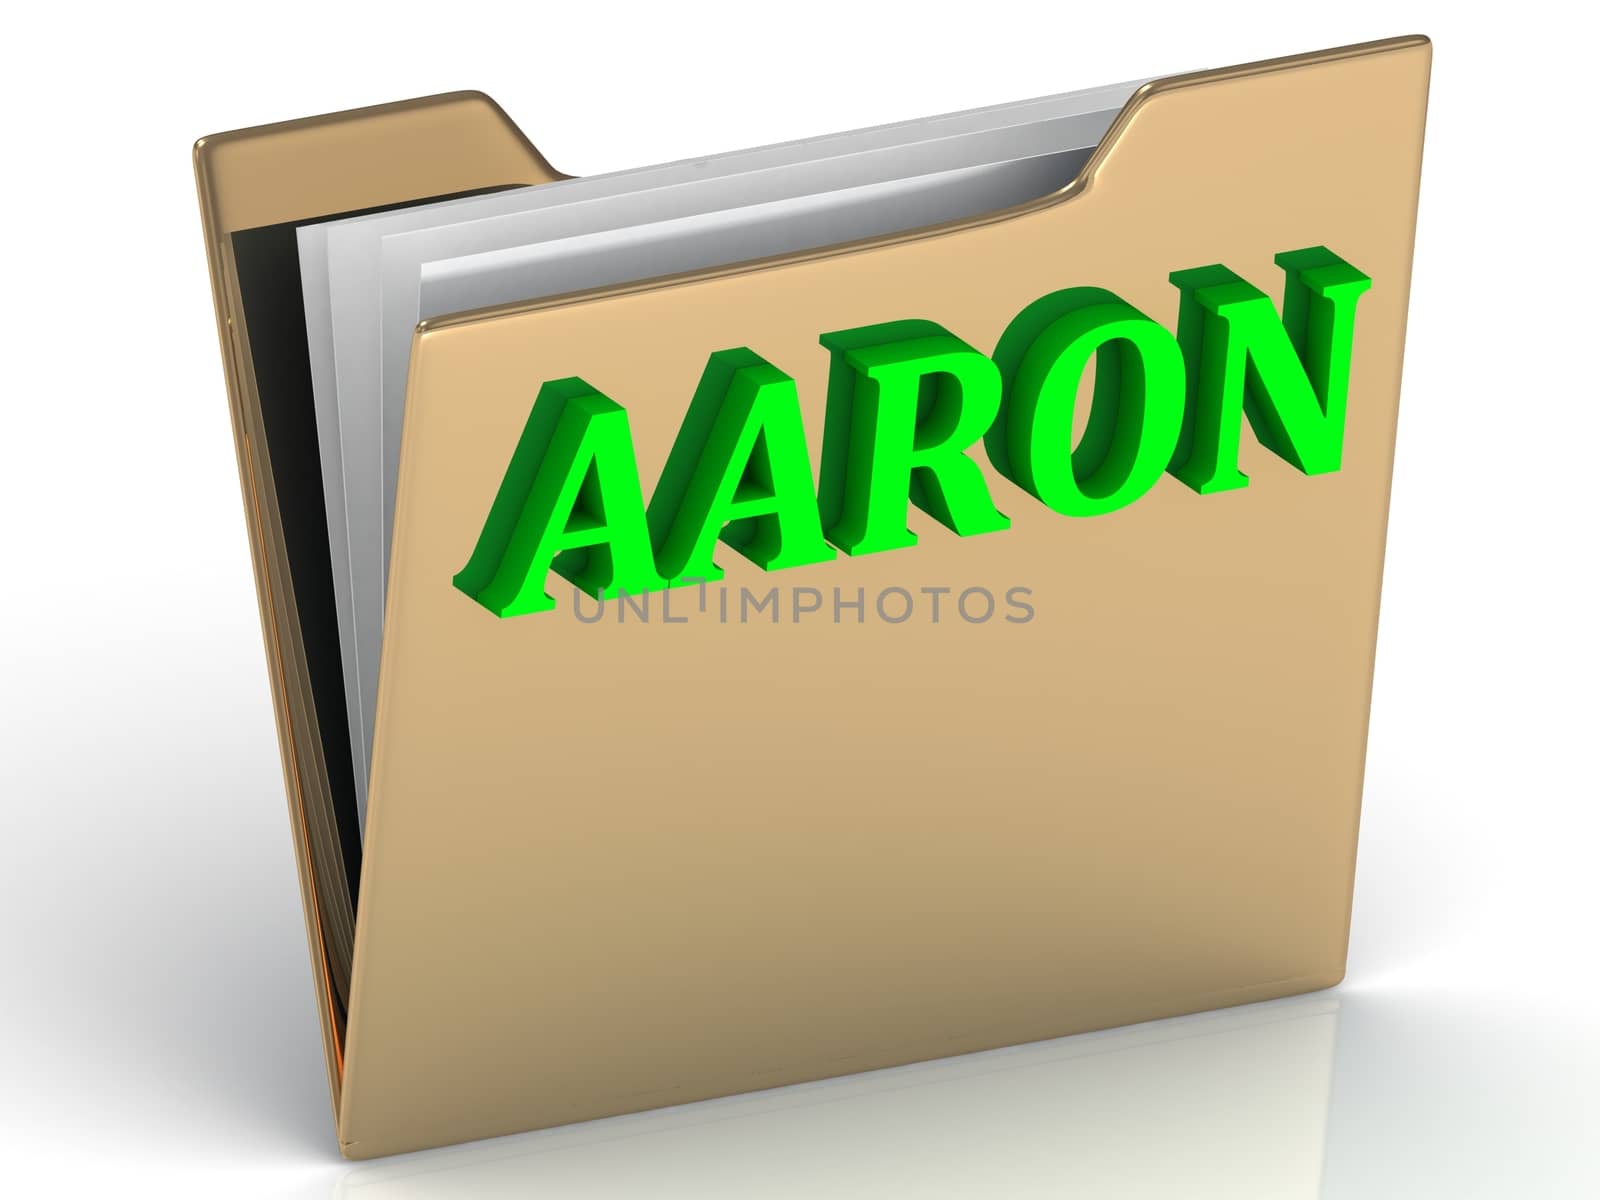 AARON- bright green letters on gold paperwork folder on a white background